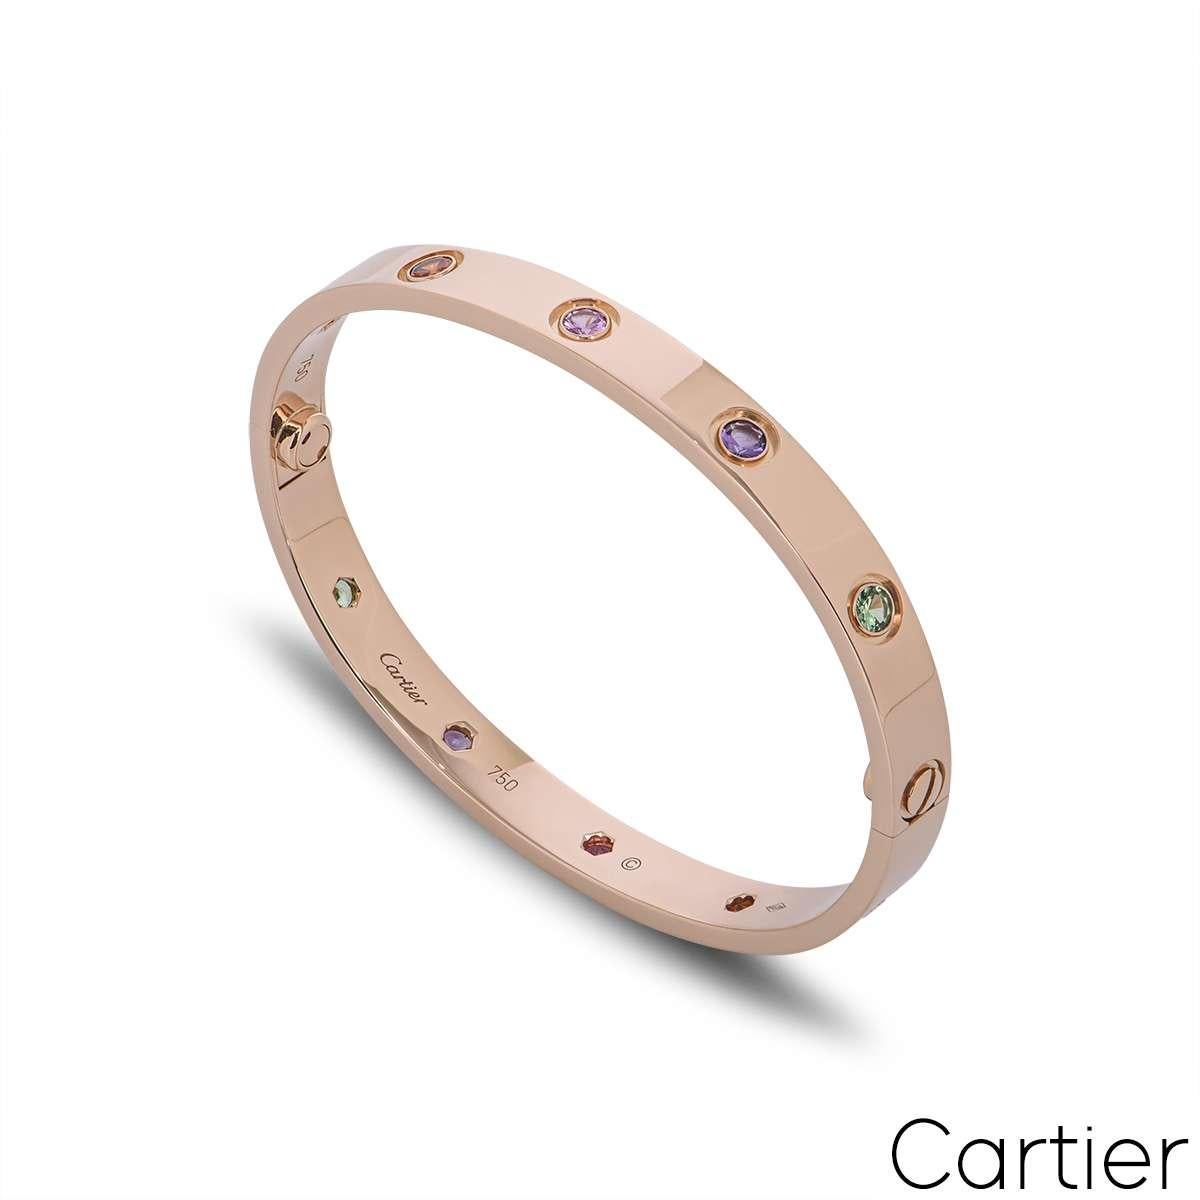 An 18k rose gold bracelet by Cartier, from their Love collection. Set with 10 coloured stones, including rose and yellow sapphires, green and orange garnets and amethysts. This bracelet features the new style screw system and is a size 16 with a